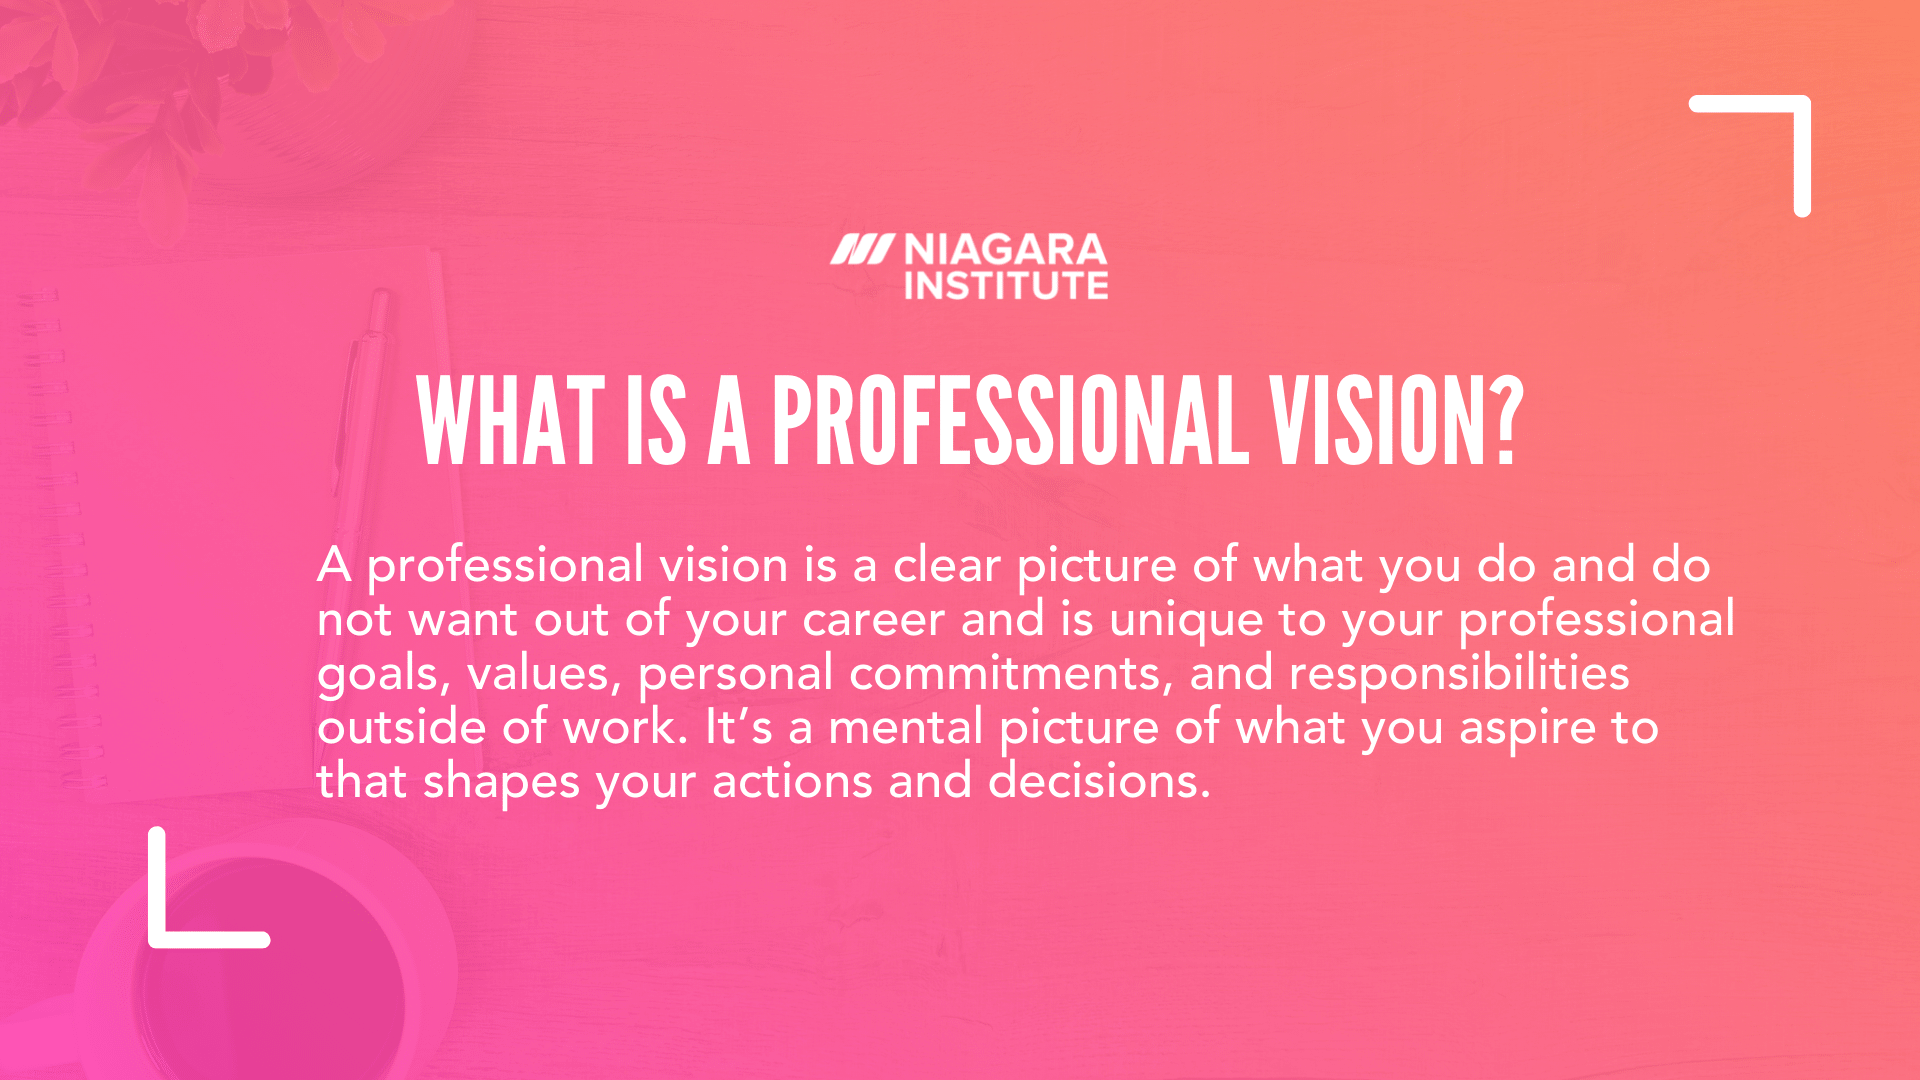 What is a professional vision?